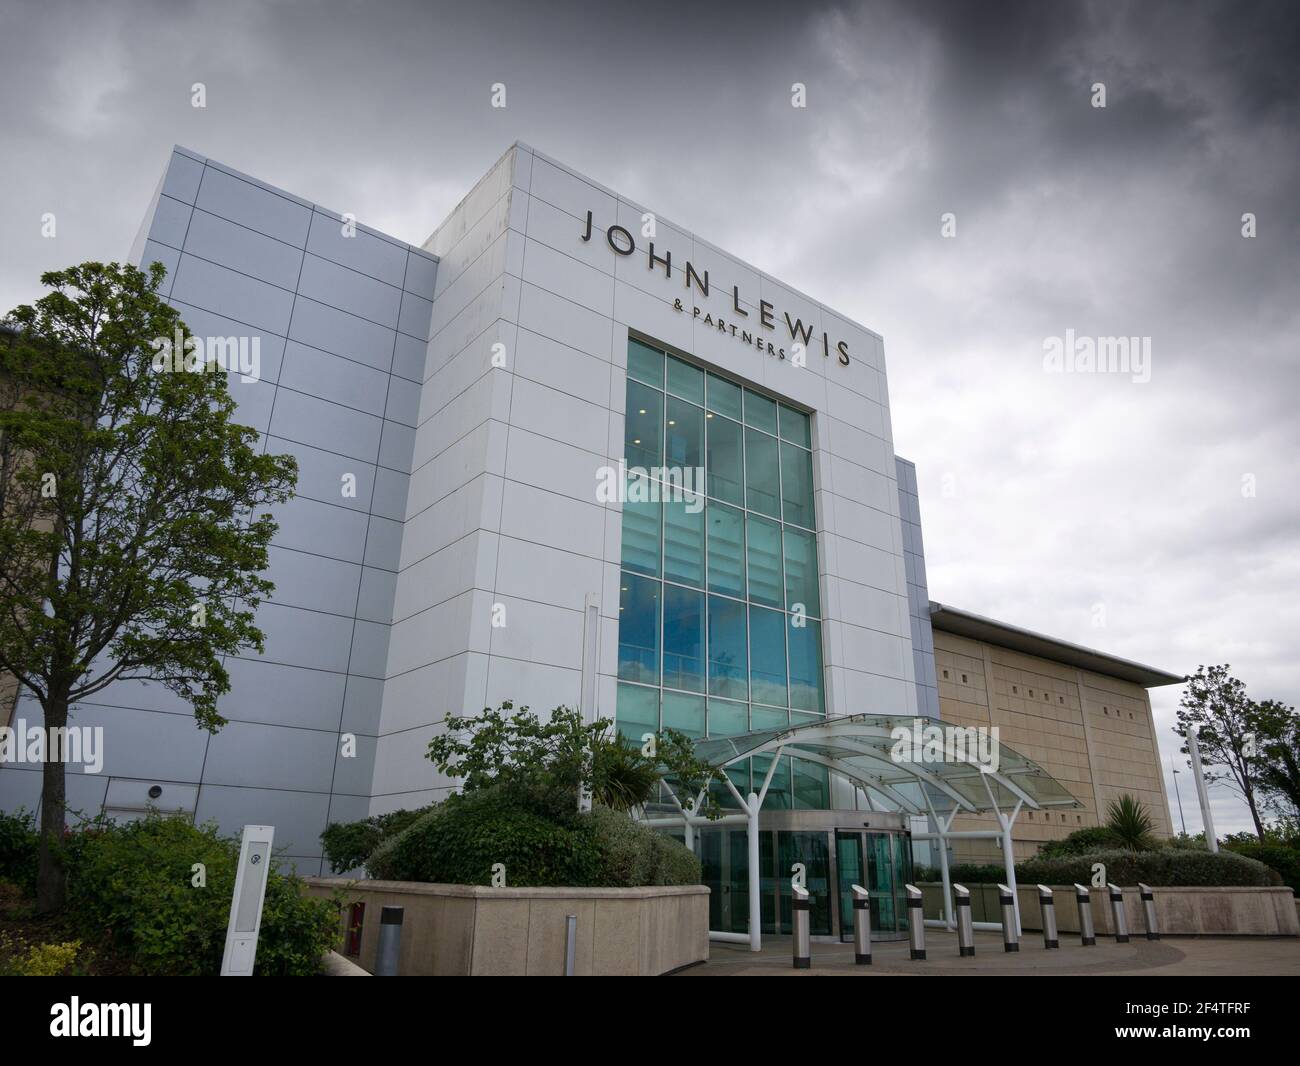 The entrance to John Lewis & Partners store under dark clouds at The Mall Shopping Centre, Cribbs Causeway, Gloucestershire near Bristol, England. Stock Photo